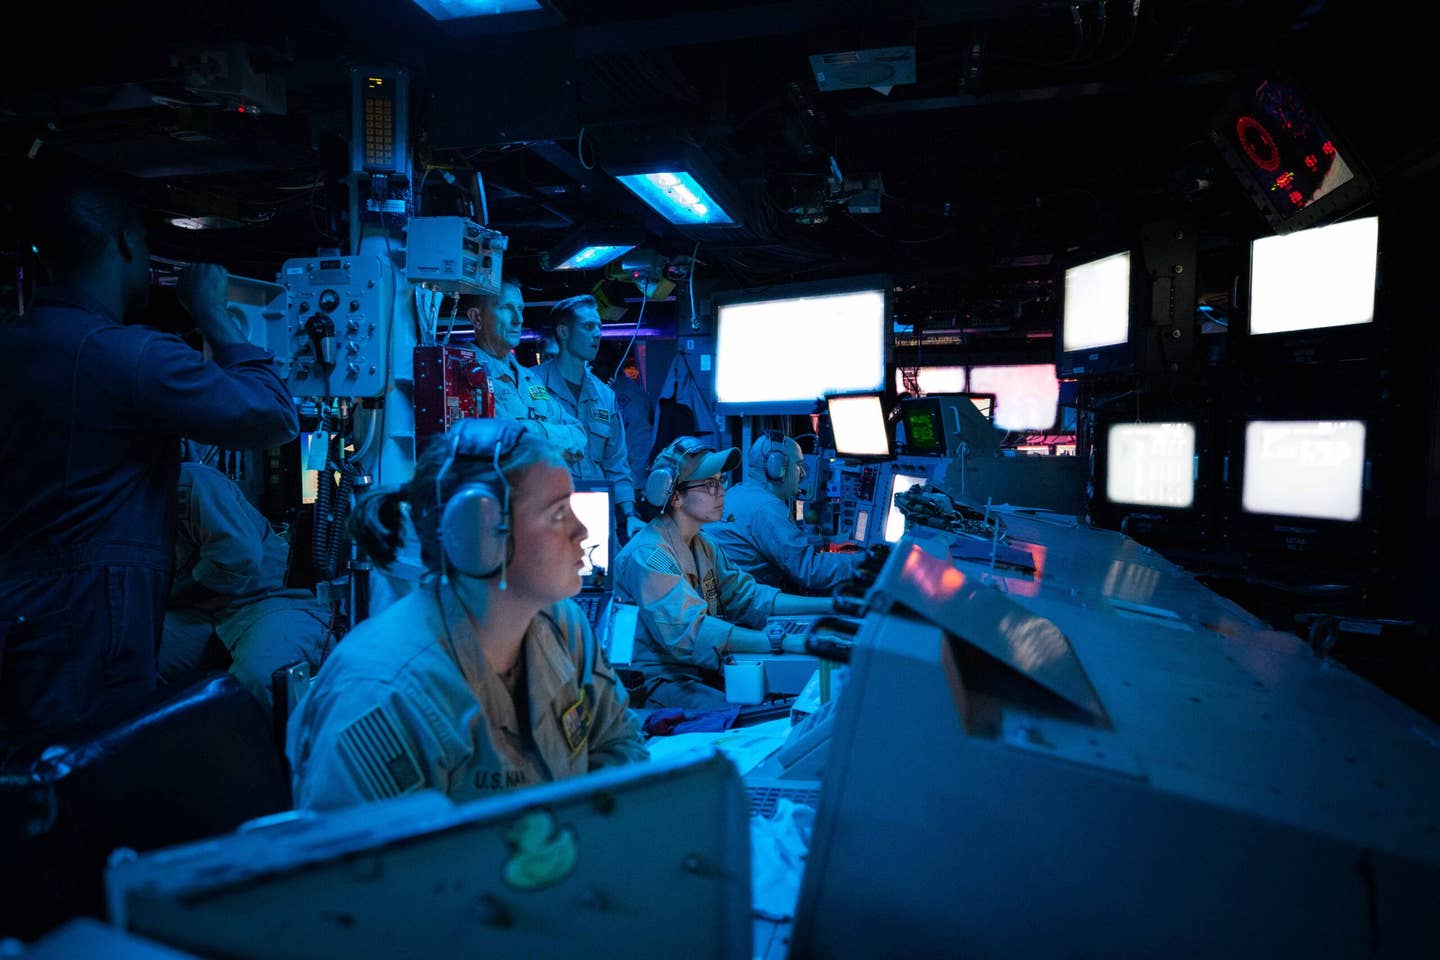 Sailors assigned to the <em>Arleigh Burke</em>-class guided-missile destroyer USS <em>Carney</em> (DDG 64) stand watch in the ship’s Combat Information Center during an operation to defeat a combination of Houthi missiles and unmanned aerial vehicles, Oct. 19, 2023. <em>Carney</em> is deployed to the U.S. 5th Fleet area of operations to help ensure maritime security and stability in the Middle East region. (U.S. Navy photo by Mass Communication Specialist 2nd Class Aaron Lau)